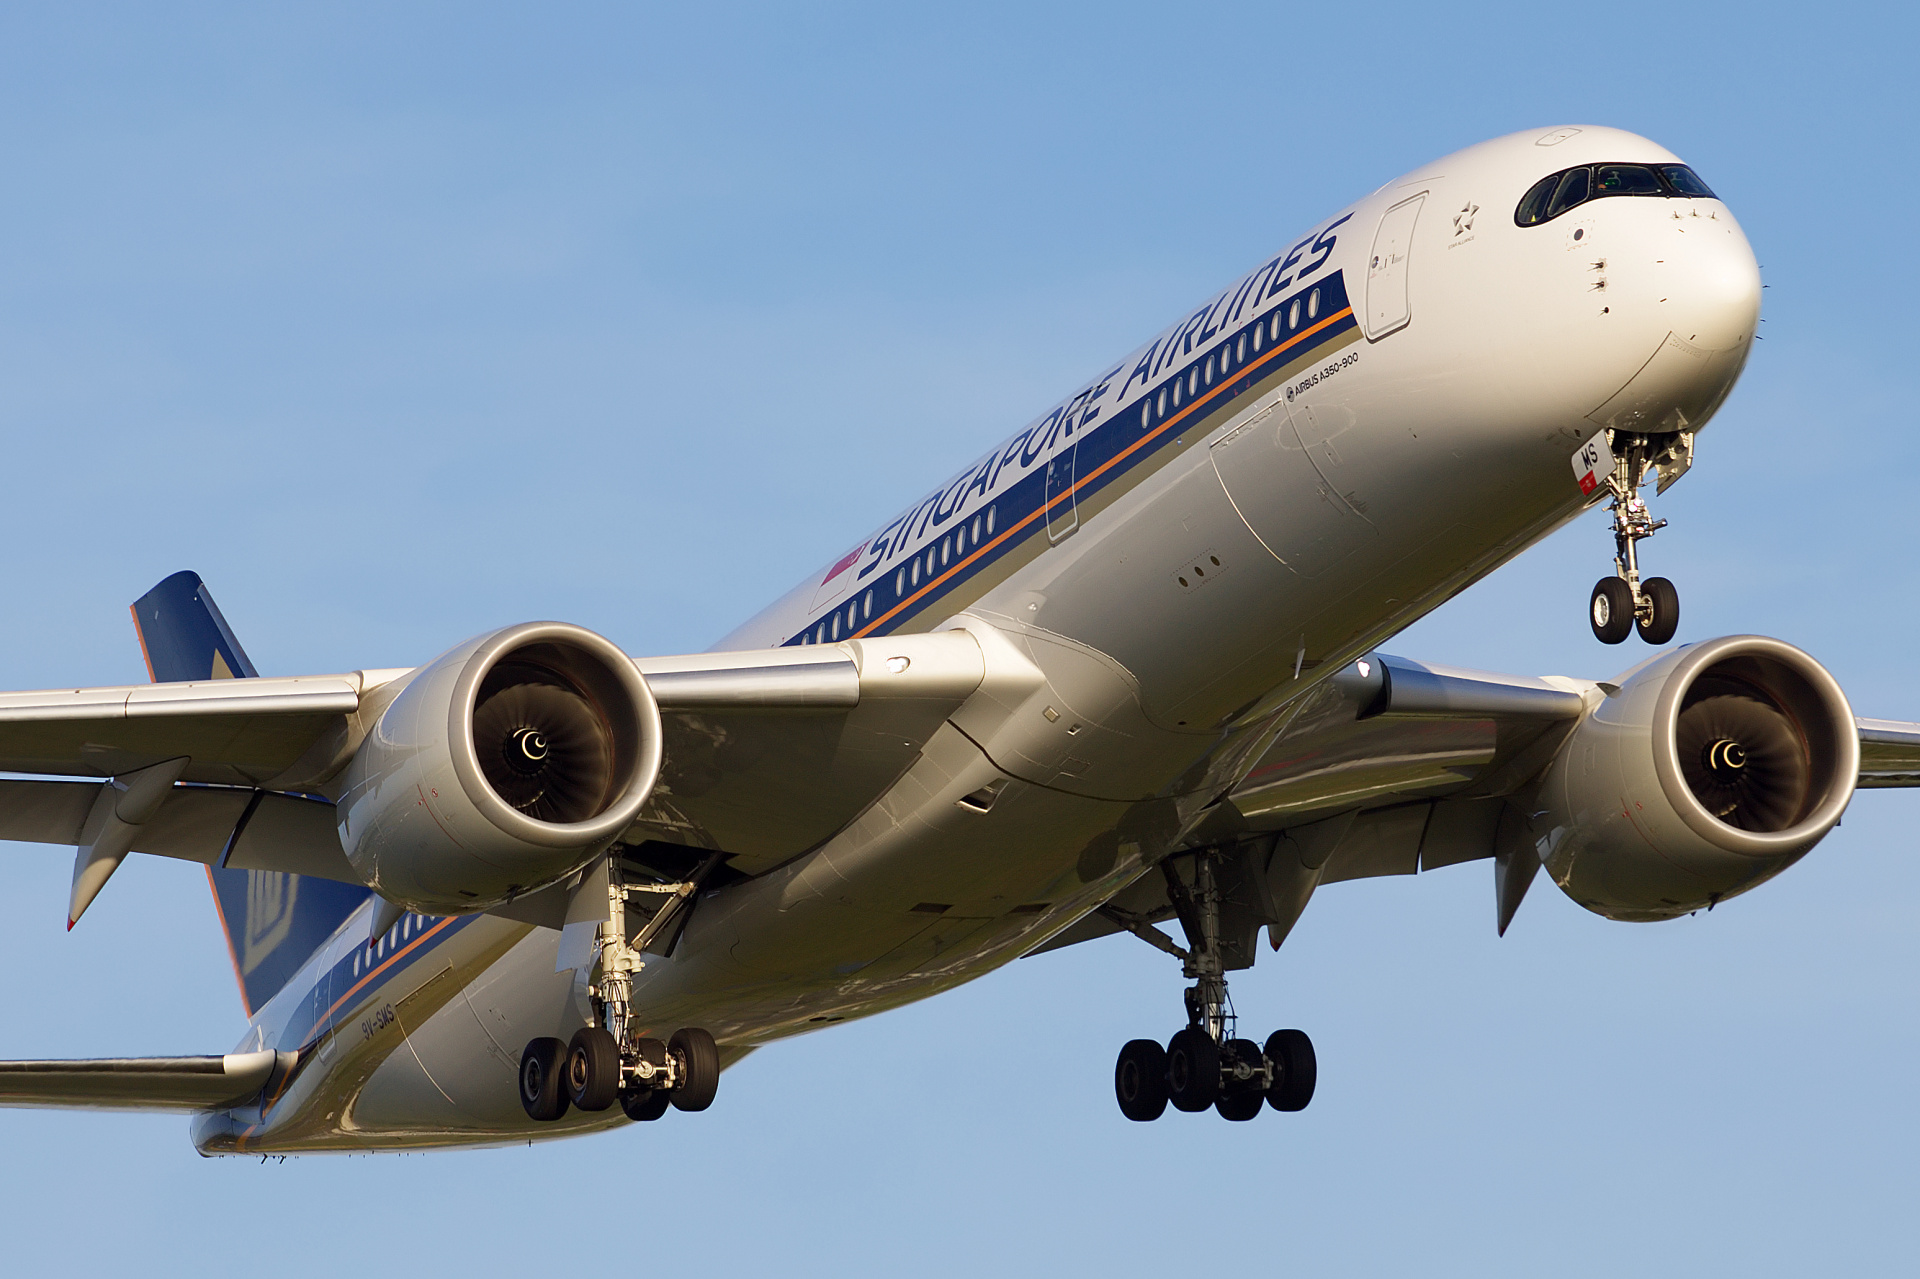 9V-SMS, Singapore Airlines (Aircraft » Schiphol Spotting » Airbus A350-900)